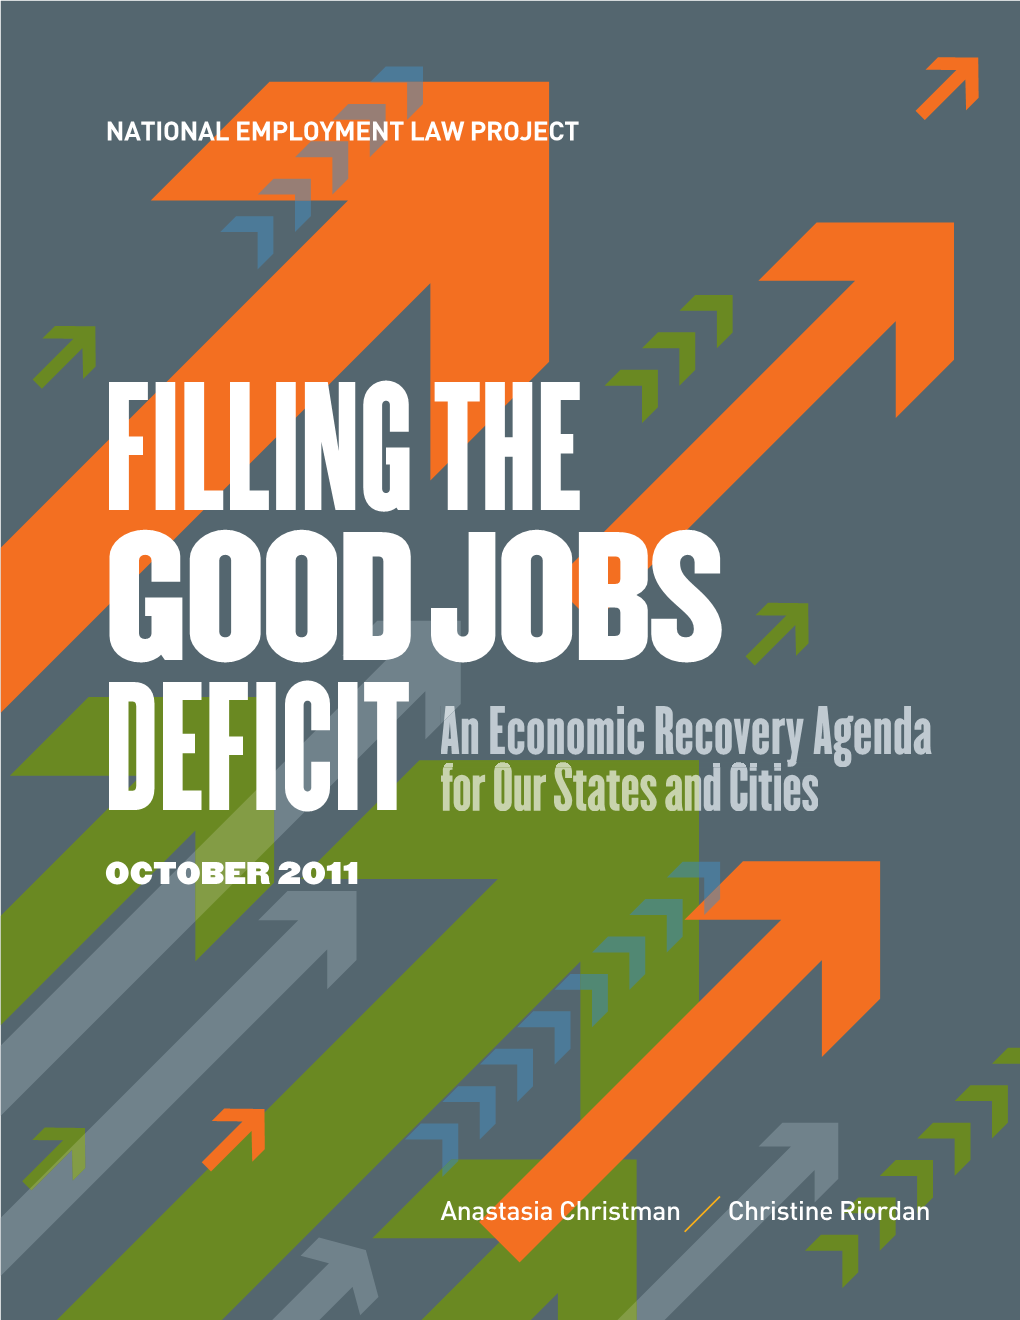 DEFICIT an Economic Recovery Agenda a Nd Cities for Our States